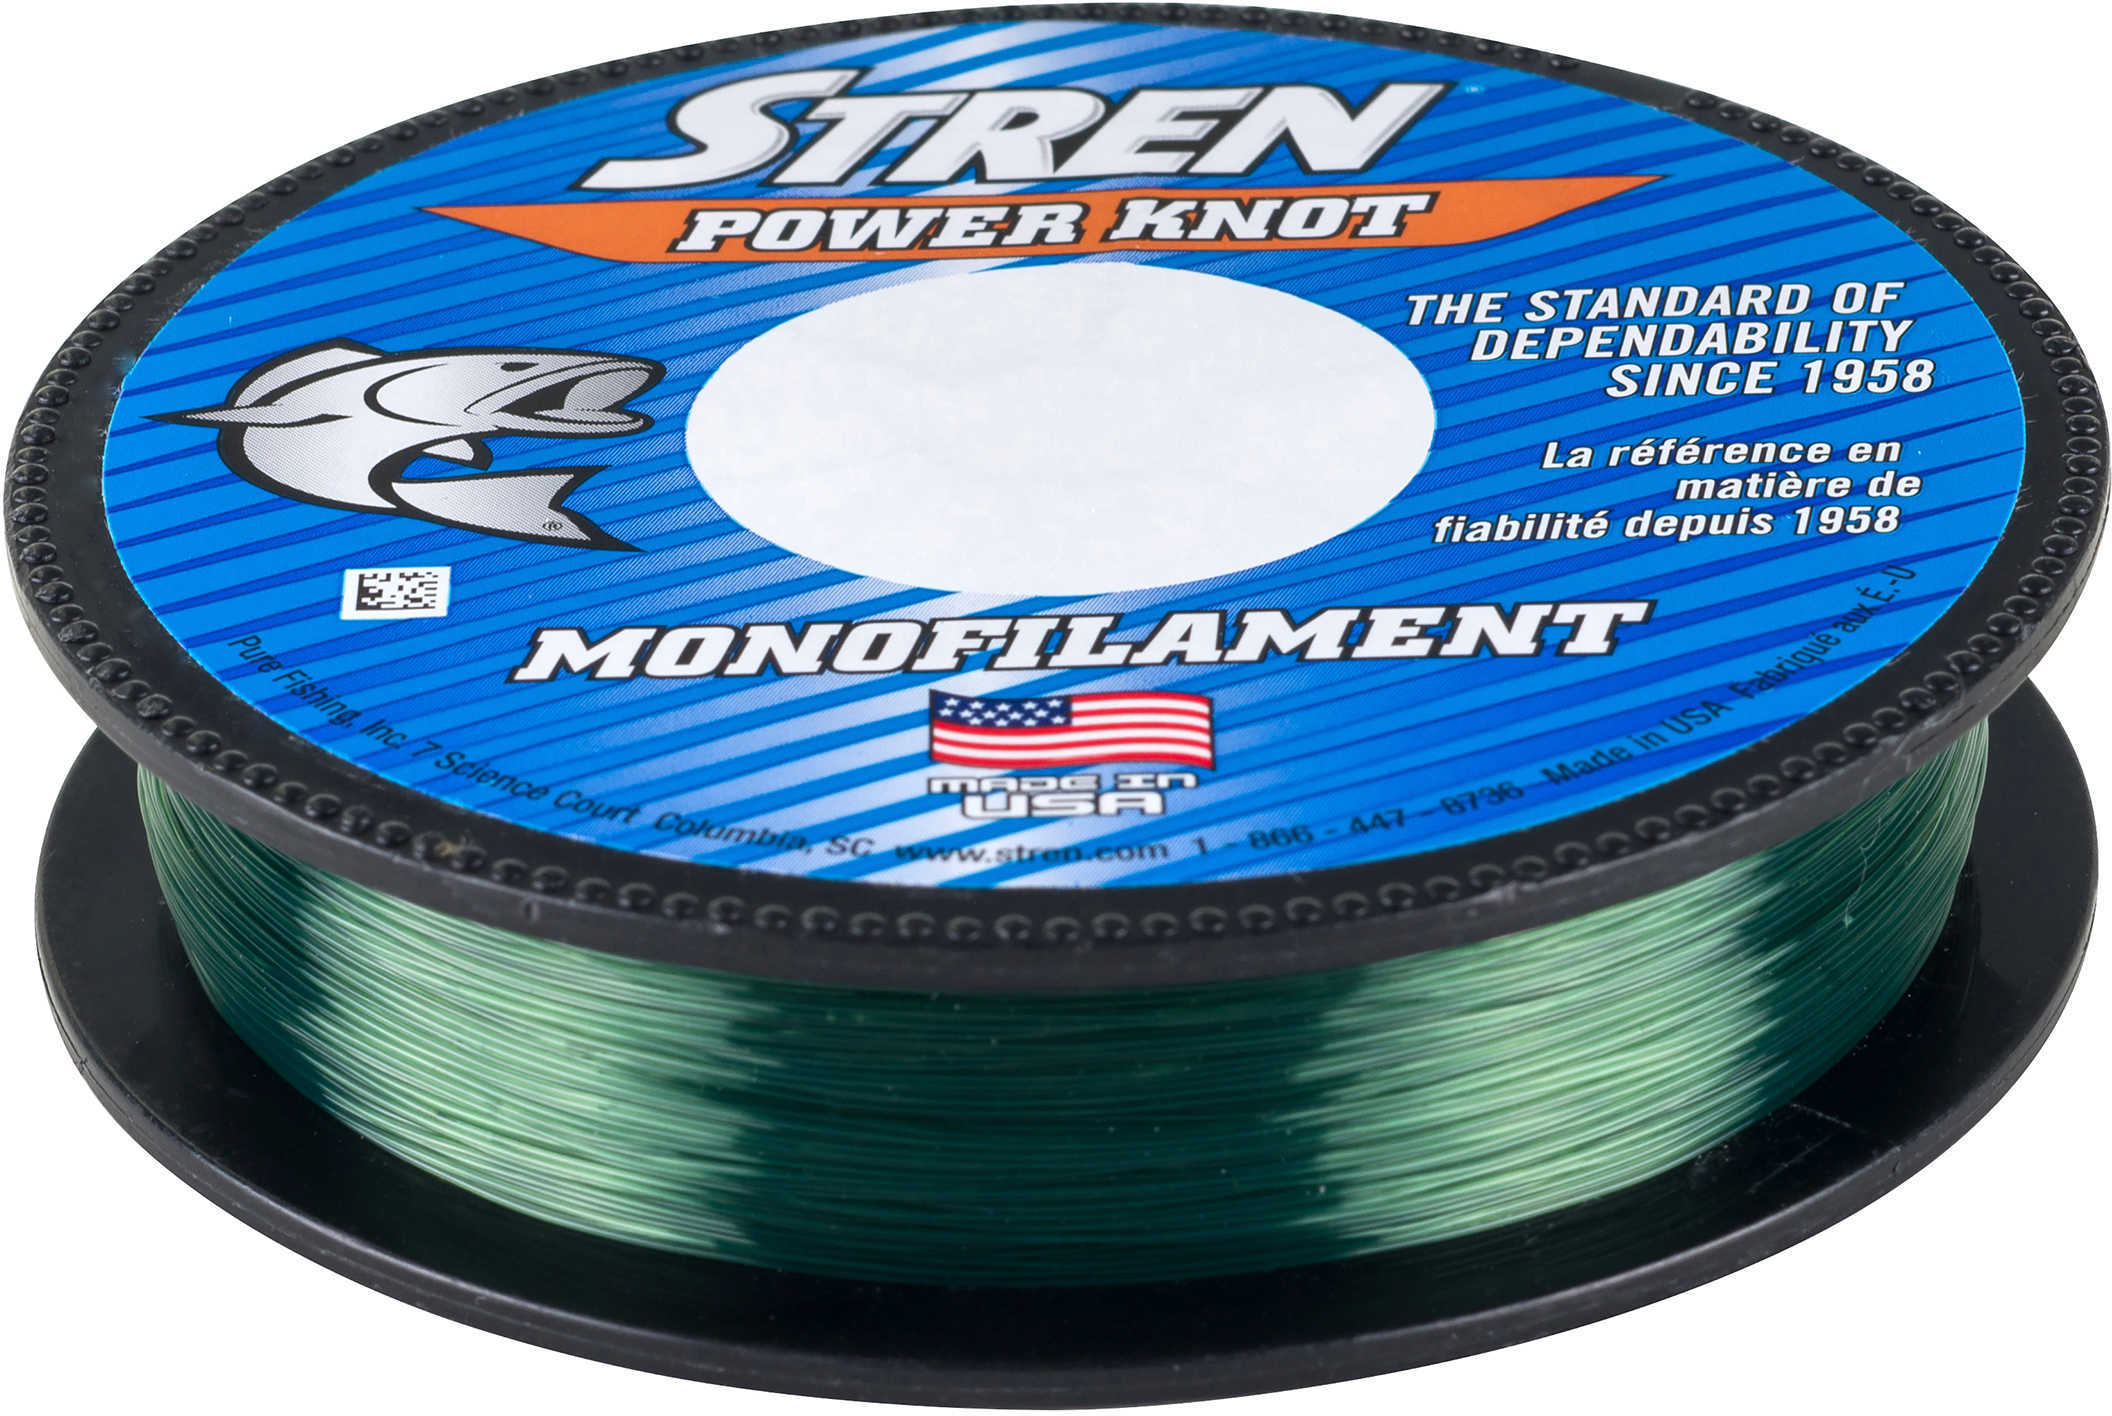 Power Knot 220 Yards , 4 lbs Strength, 0.008", Lo-Vis Green Md: 1367558